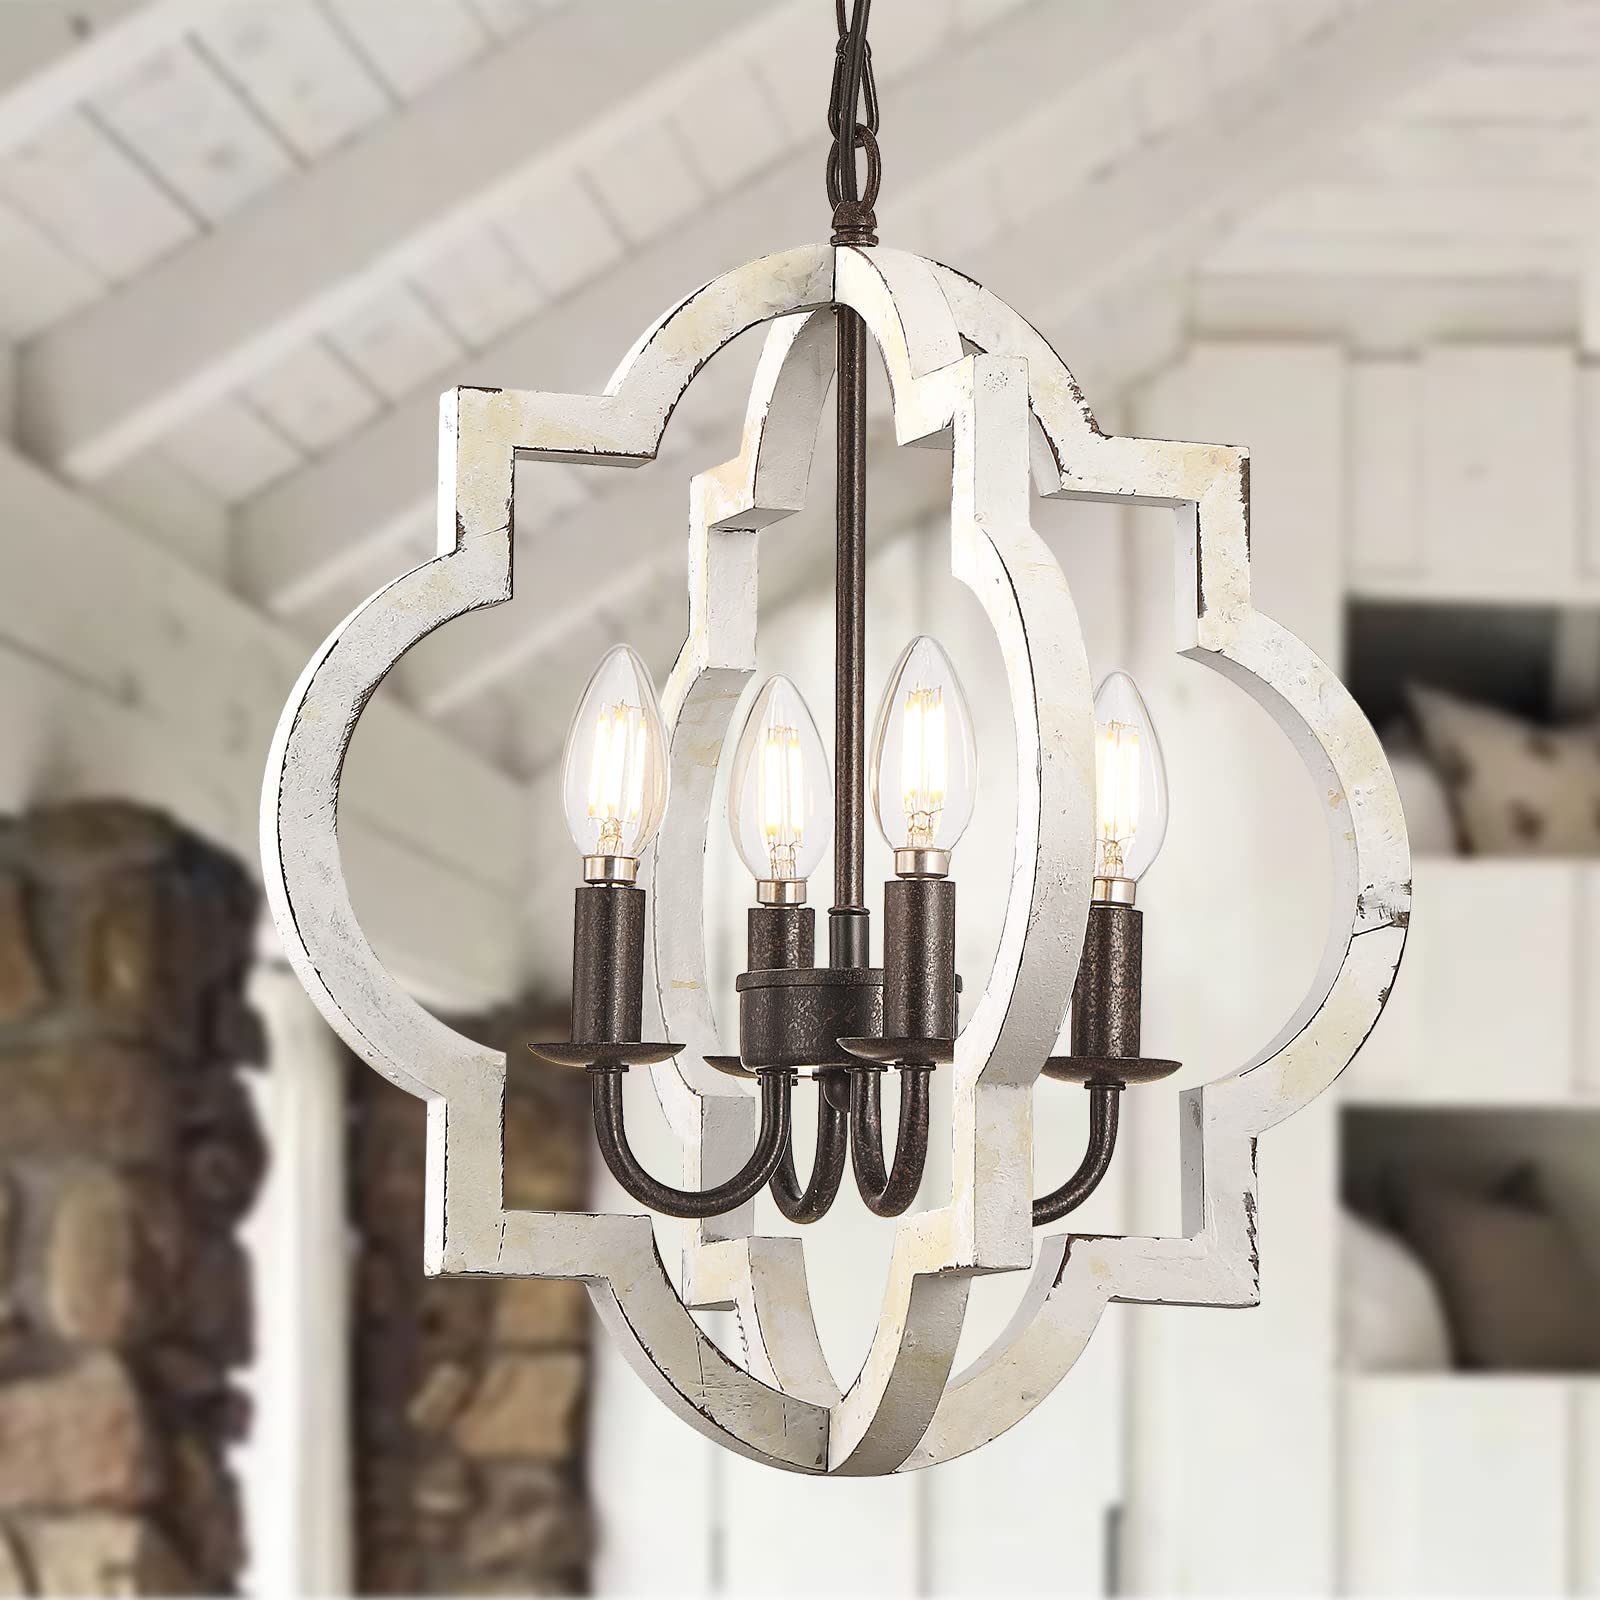 Fabulis 4-Light Farmhouse Orb chandelier, Hand-Painted Distressed Wood Hanging Island Light Fixture for Dining Foyer Entryway Li